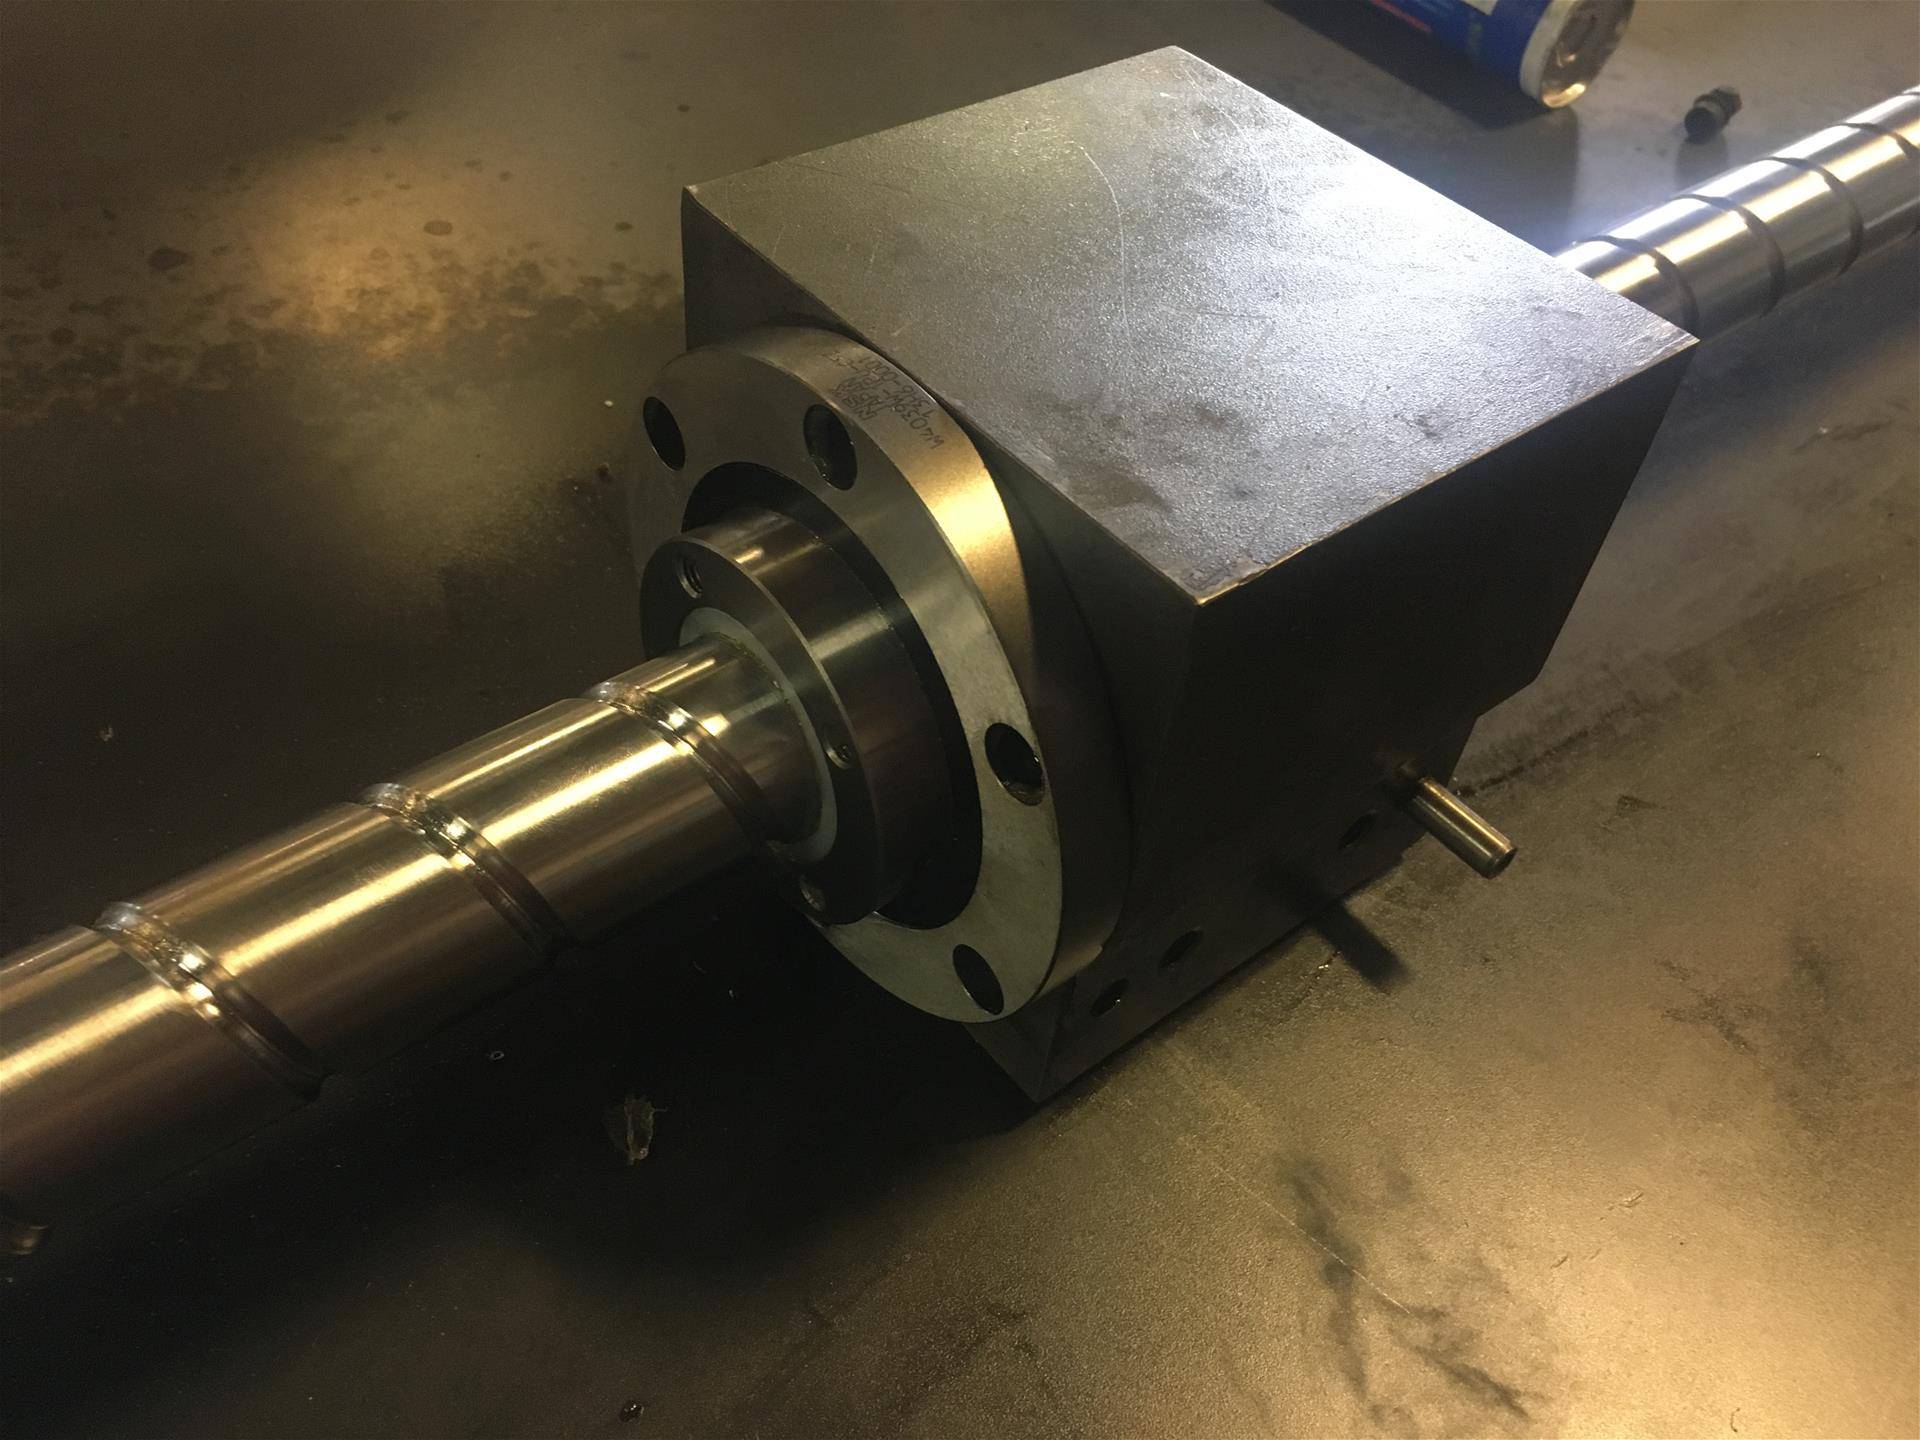 Cleaned up X-Axis Ball Screw Ready for Installation